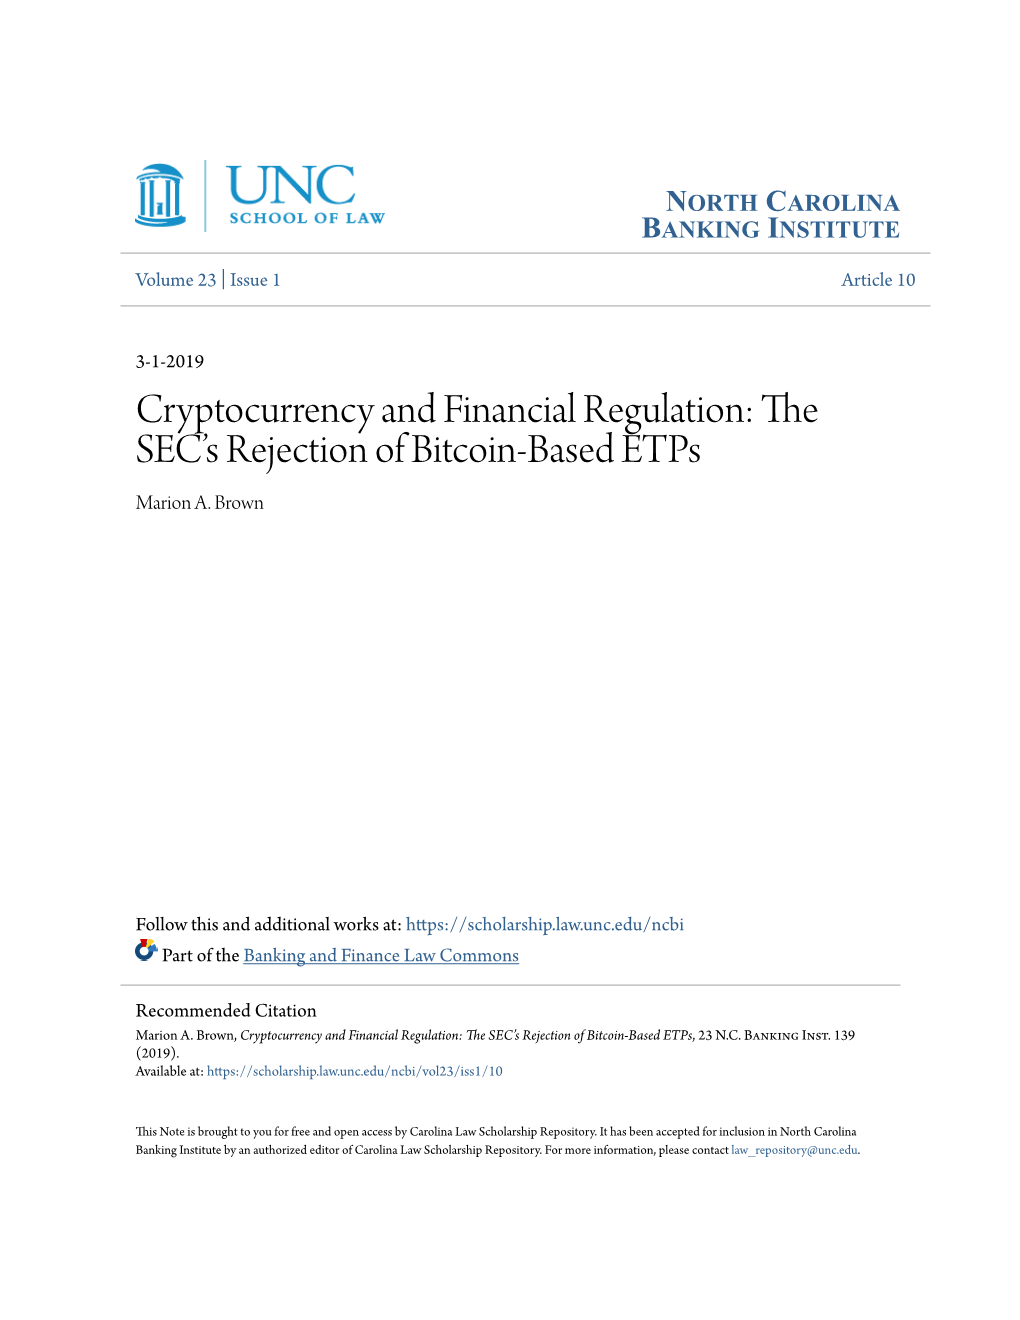 Cryptocurrency and Financial Regulation: the SEC’S Rejection of Bitcoin-Based Etps Marion A